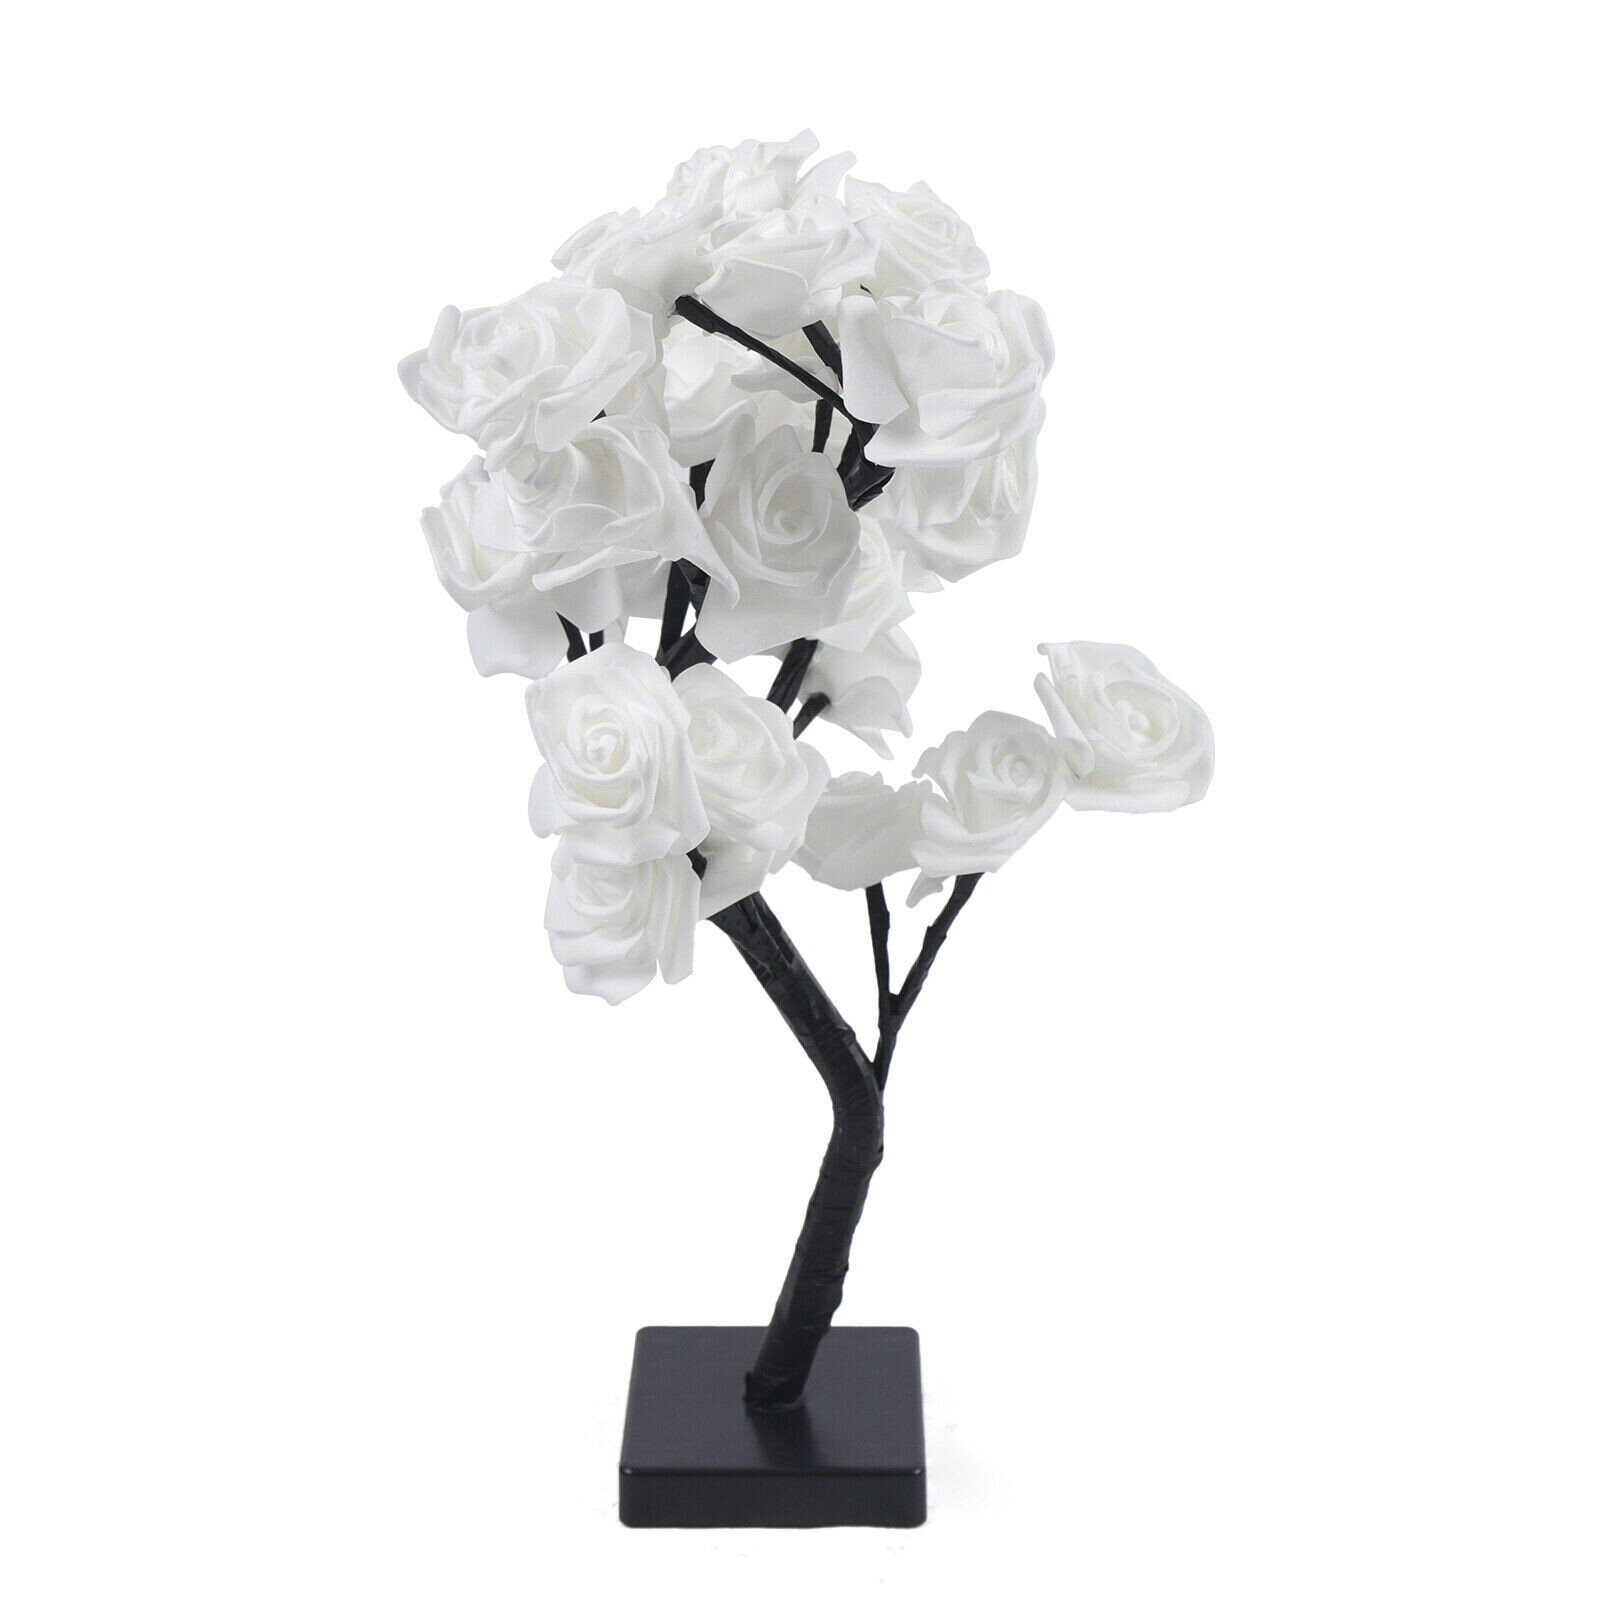 32 LEDs Rose Flower Desk Tree Light Table Lamp Home Party Wedding Decorate Gift 